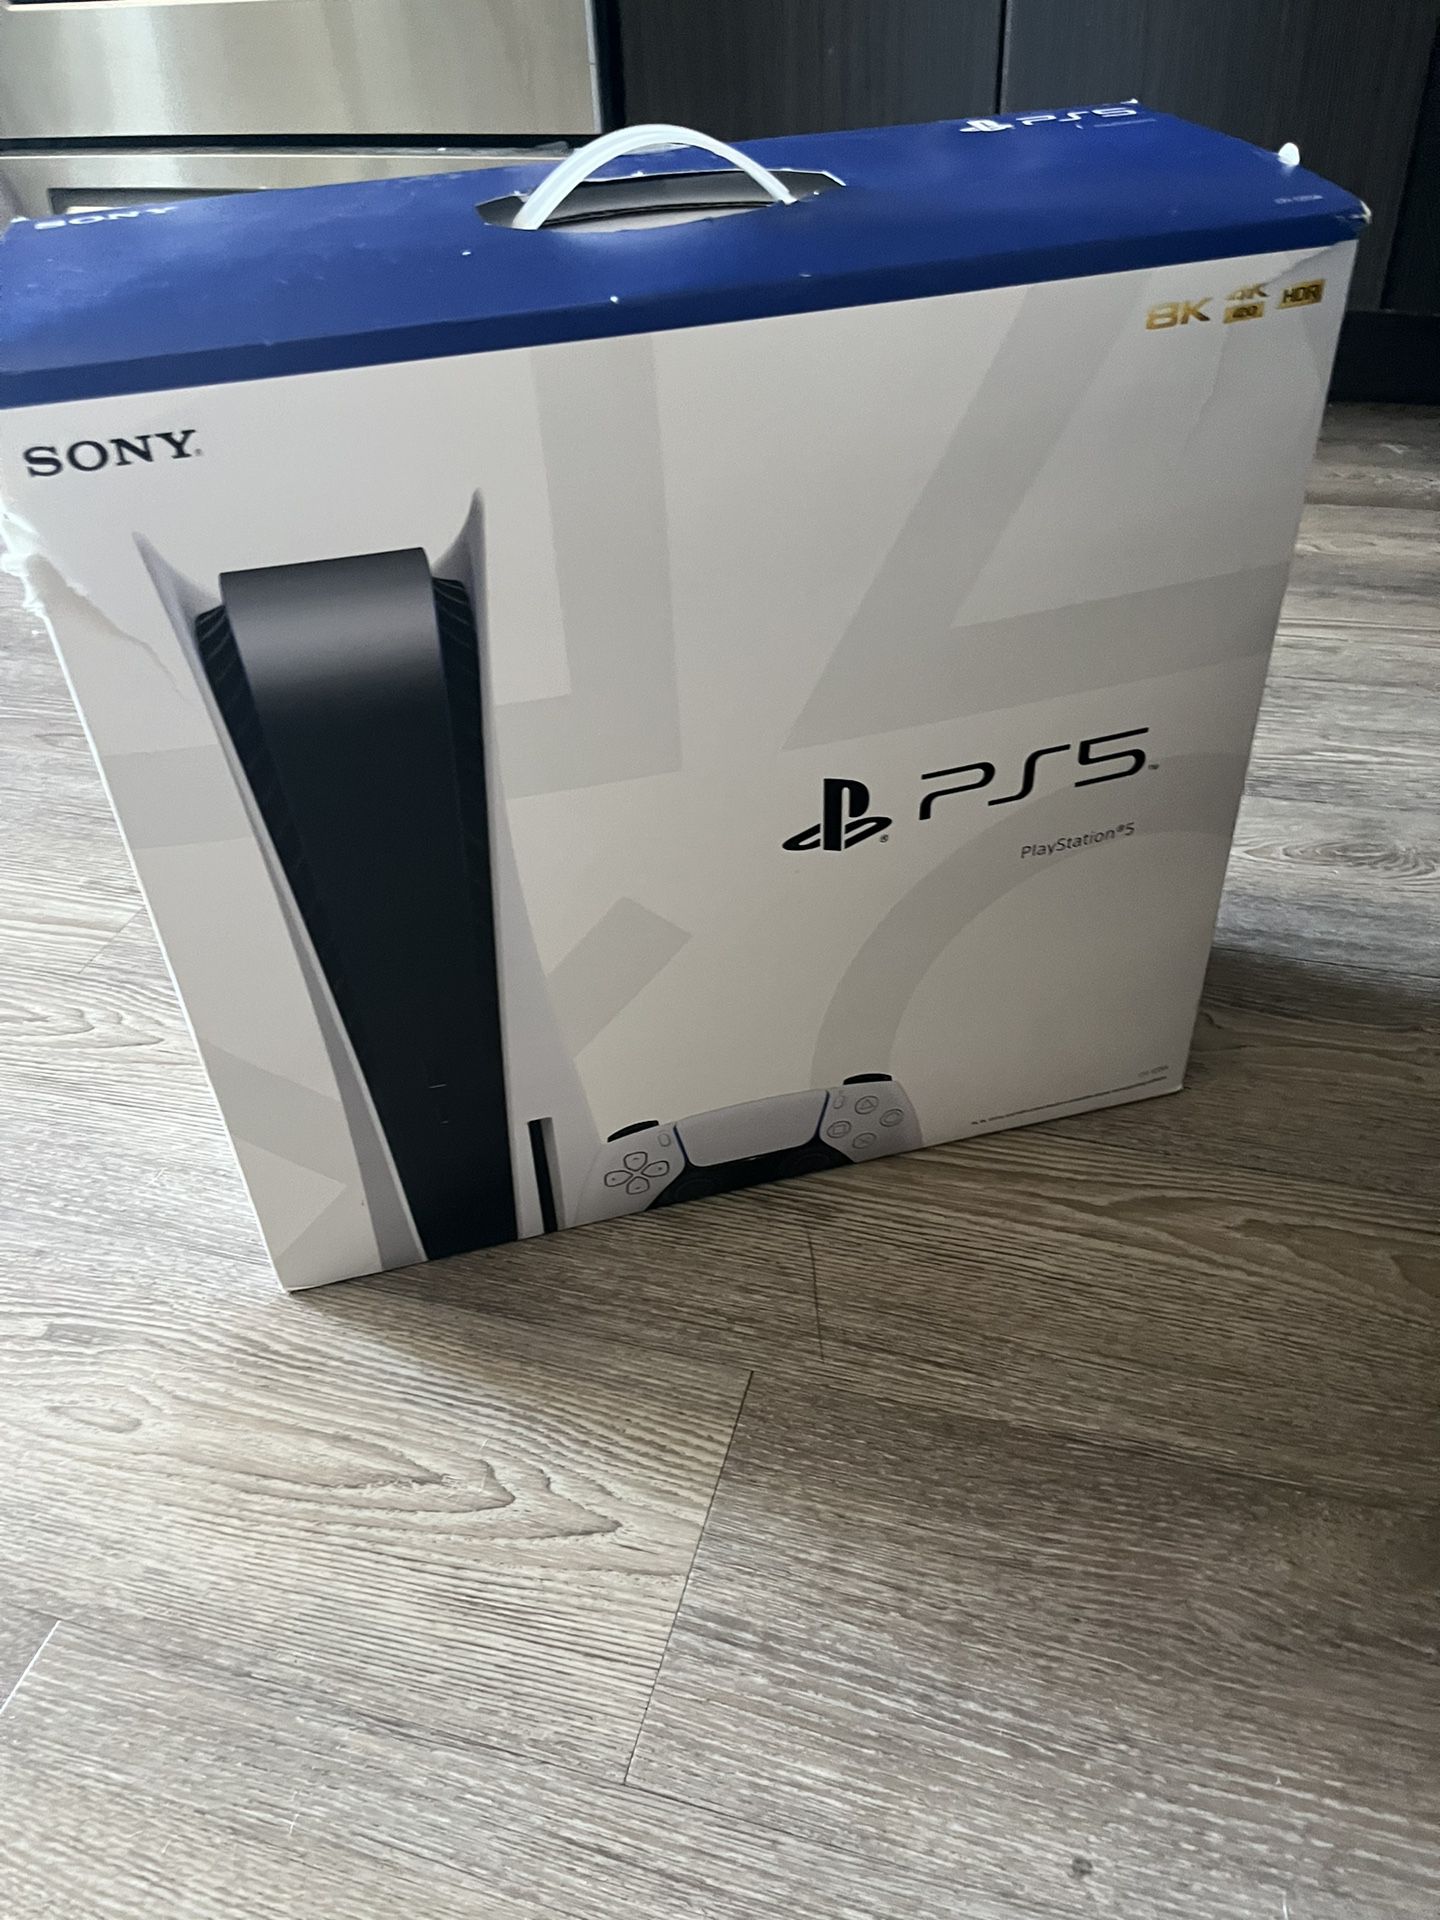 Ps5 Good condition